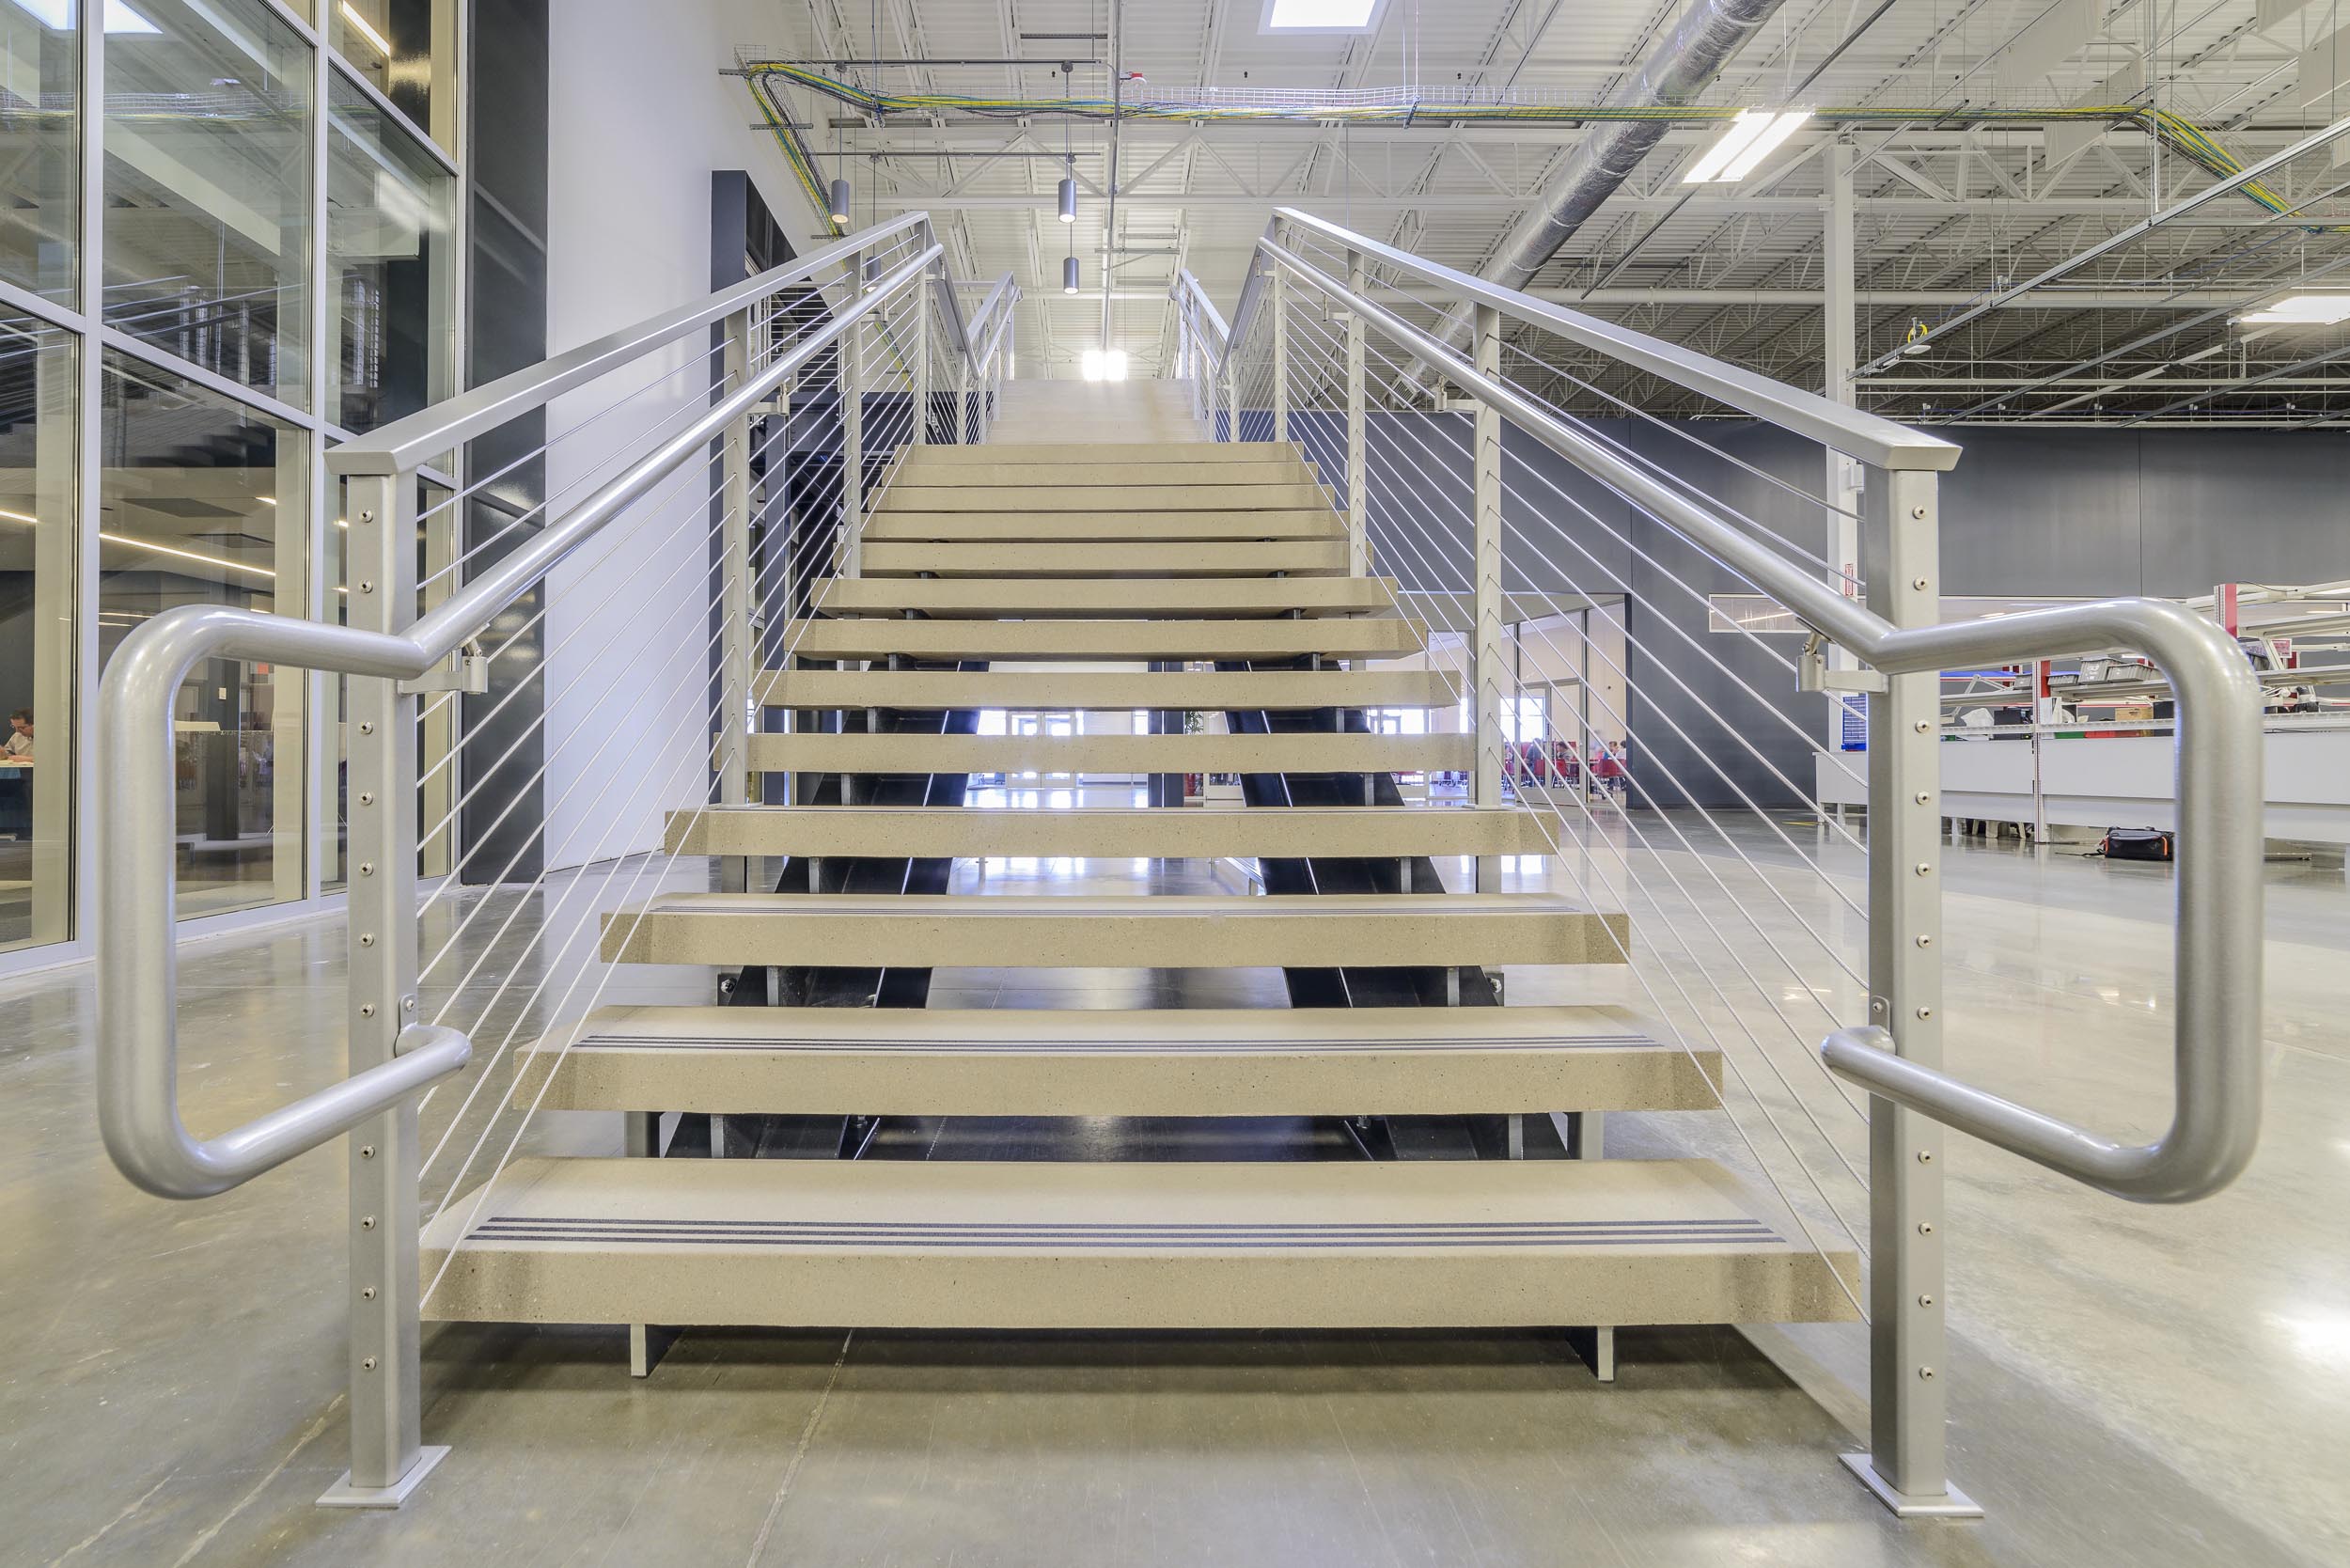 Shop stairs monumental stair and cable railing 1